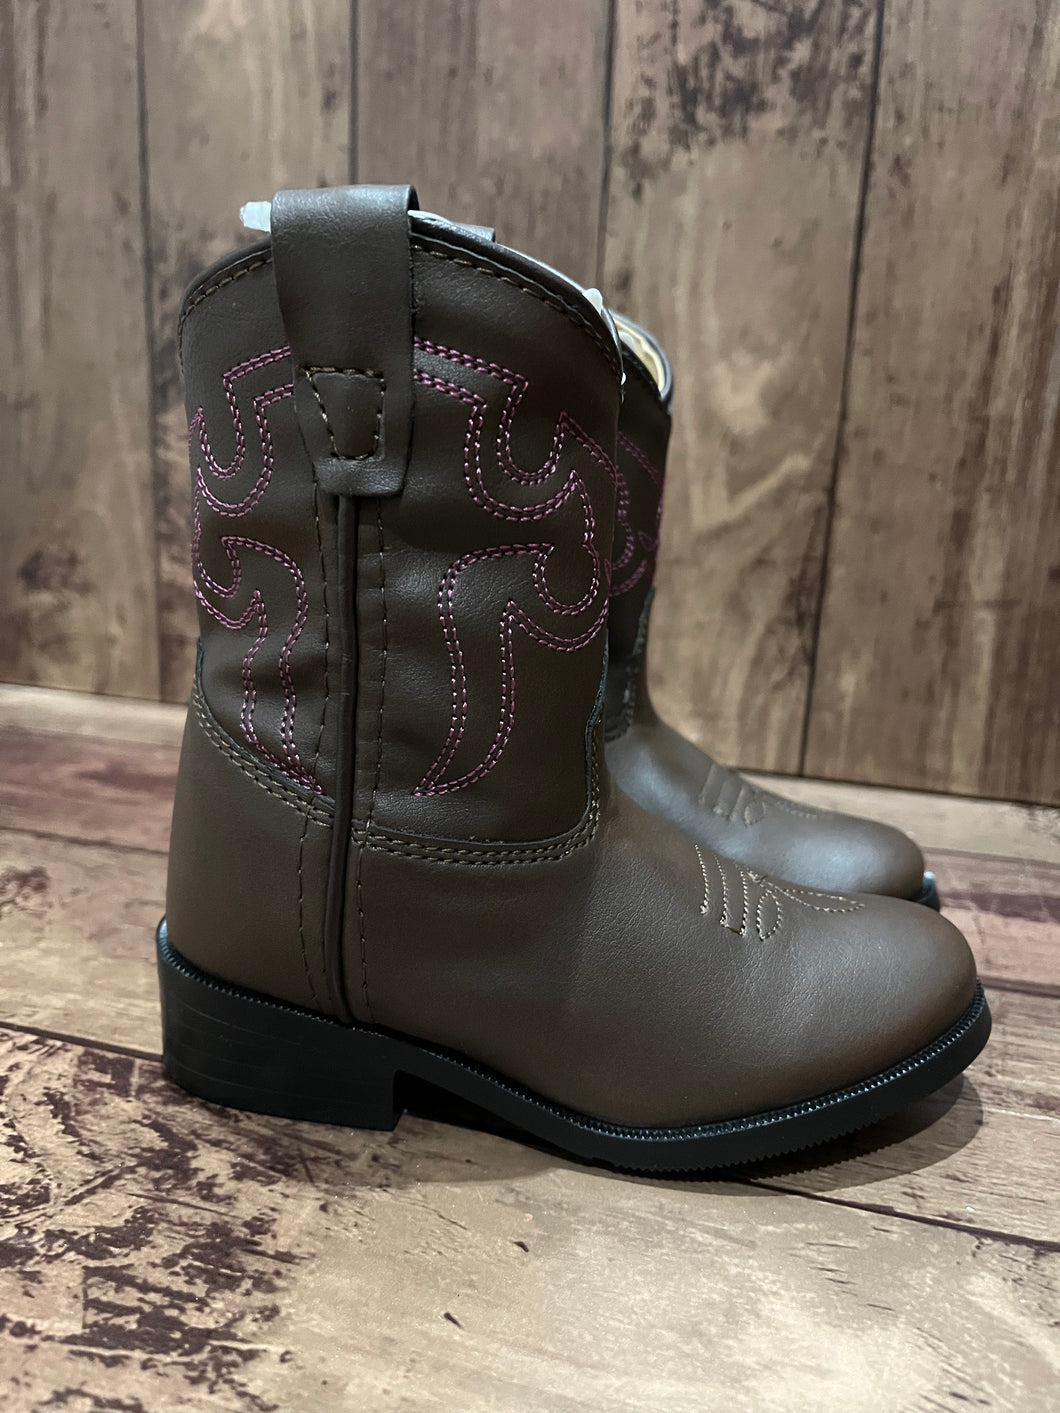 Smoky Mountain Boots 1624T Monterey Brown/Pink Western Toddler Boots